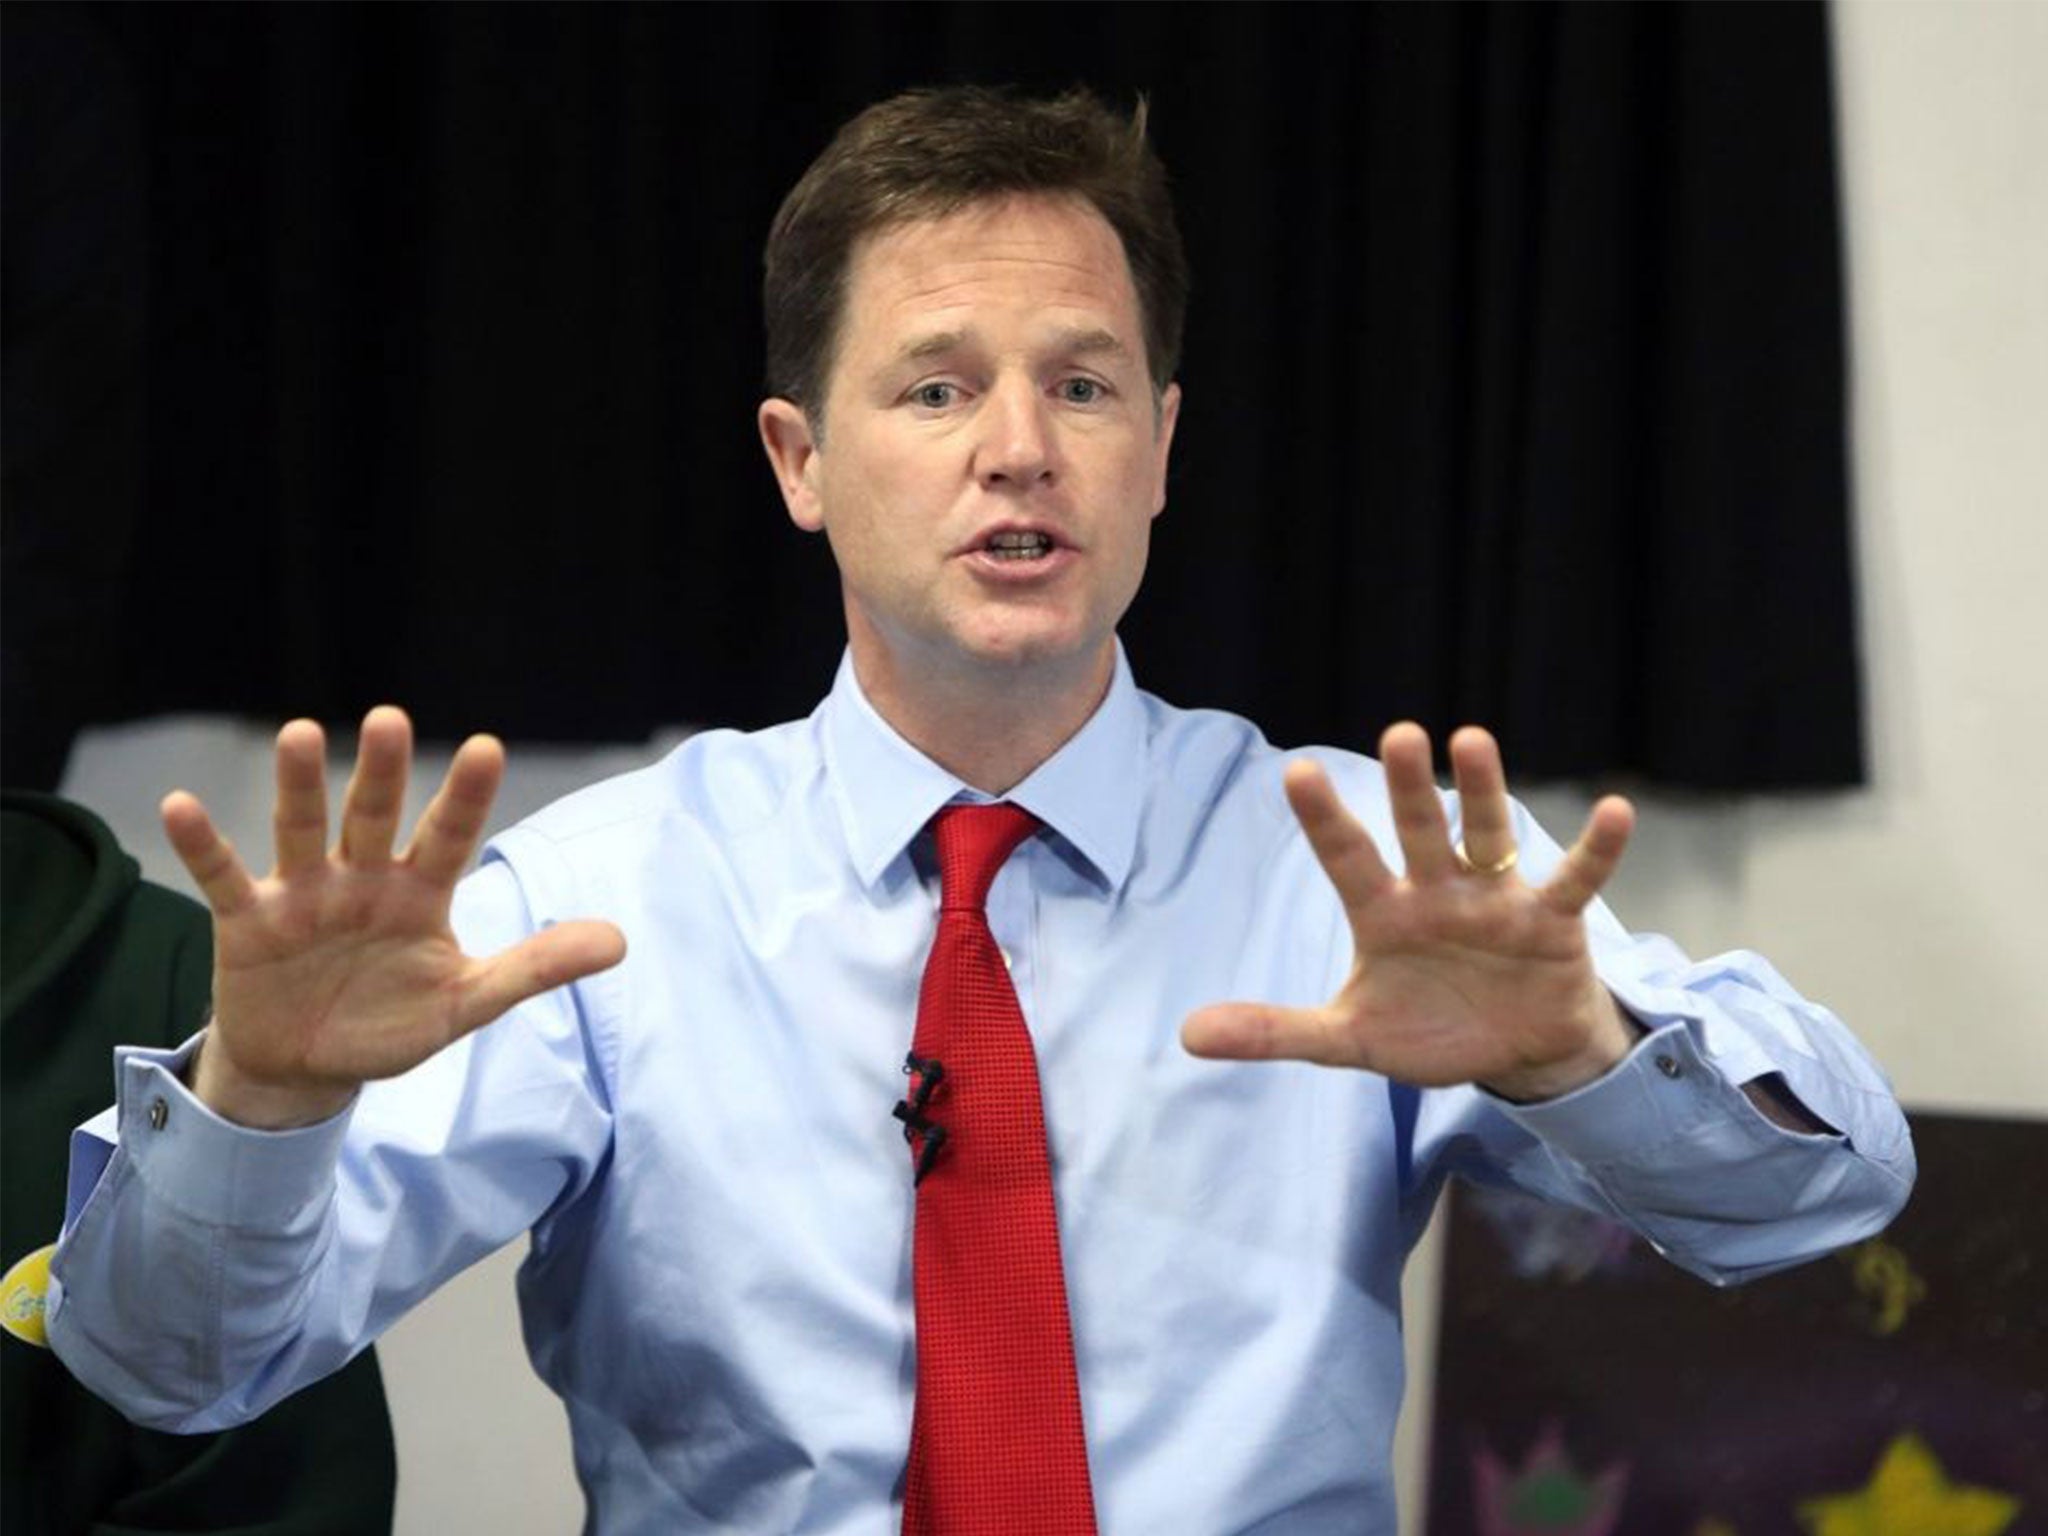 Nick Clegg is under pressure after disastrous EU and local election results